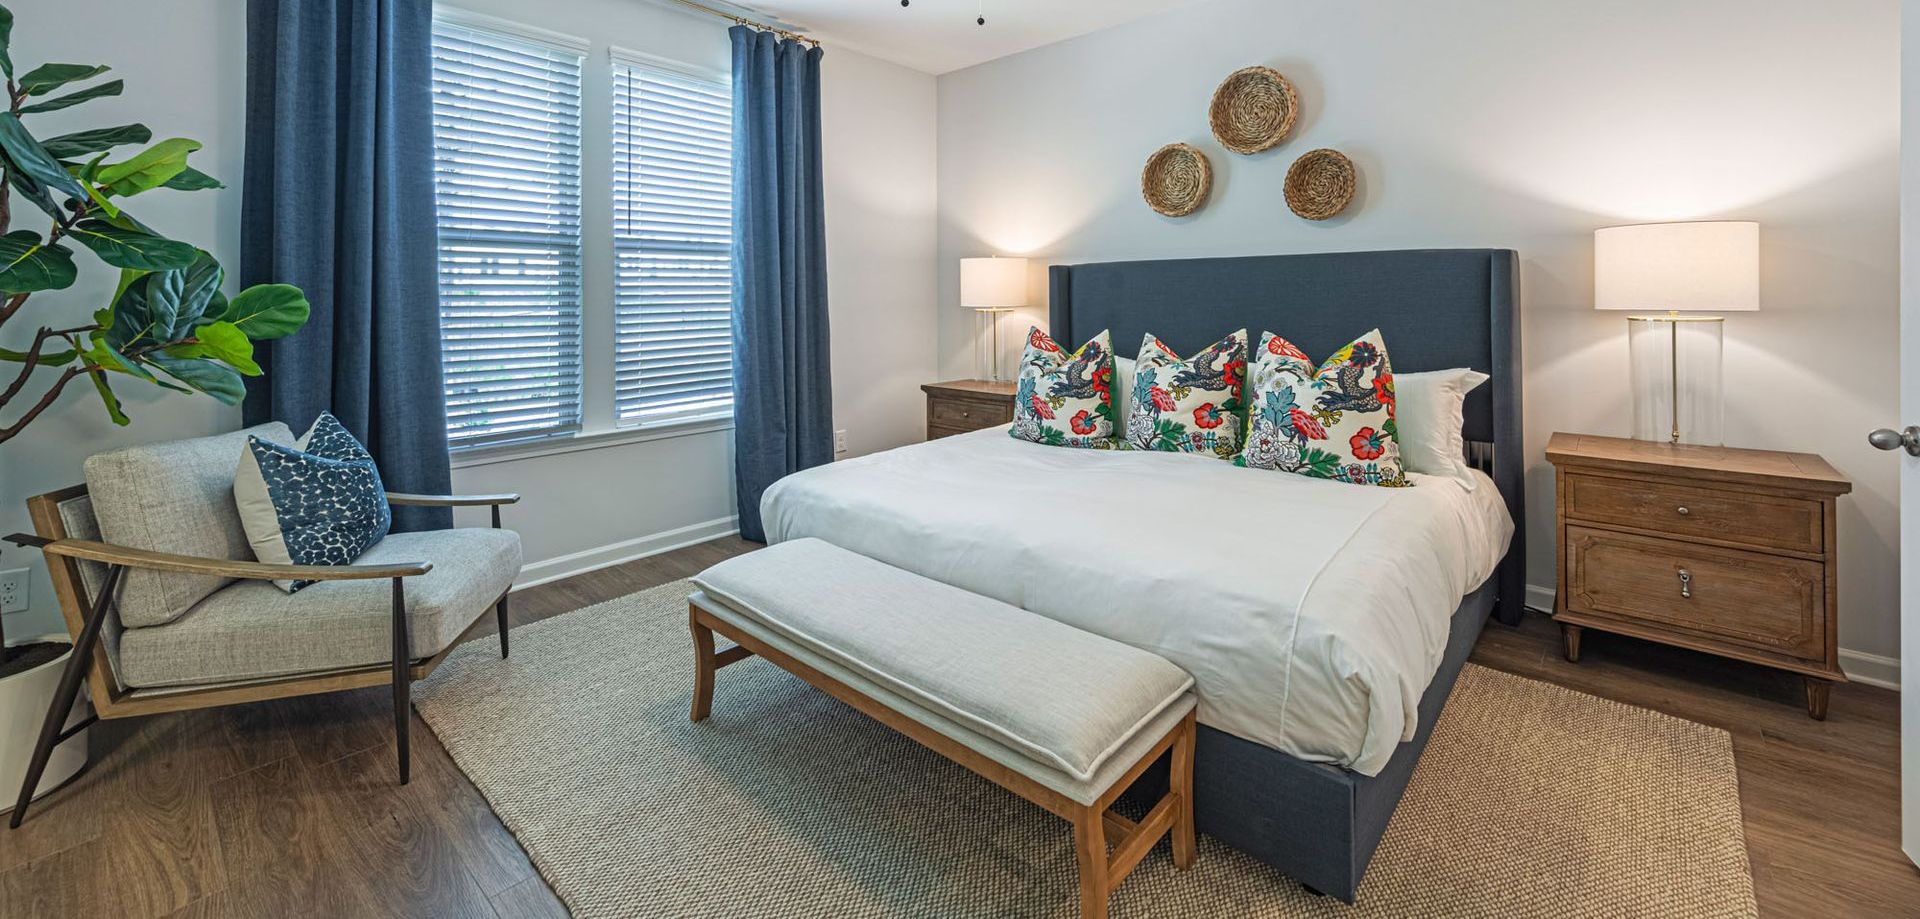 A bedroom with a king size bed , chair , nightstand and bench at Mayridge Canton FKA Summerwalk Townhomes